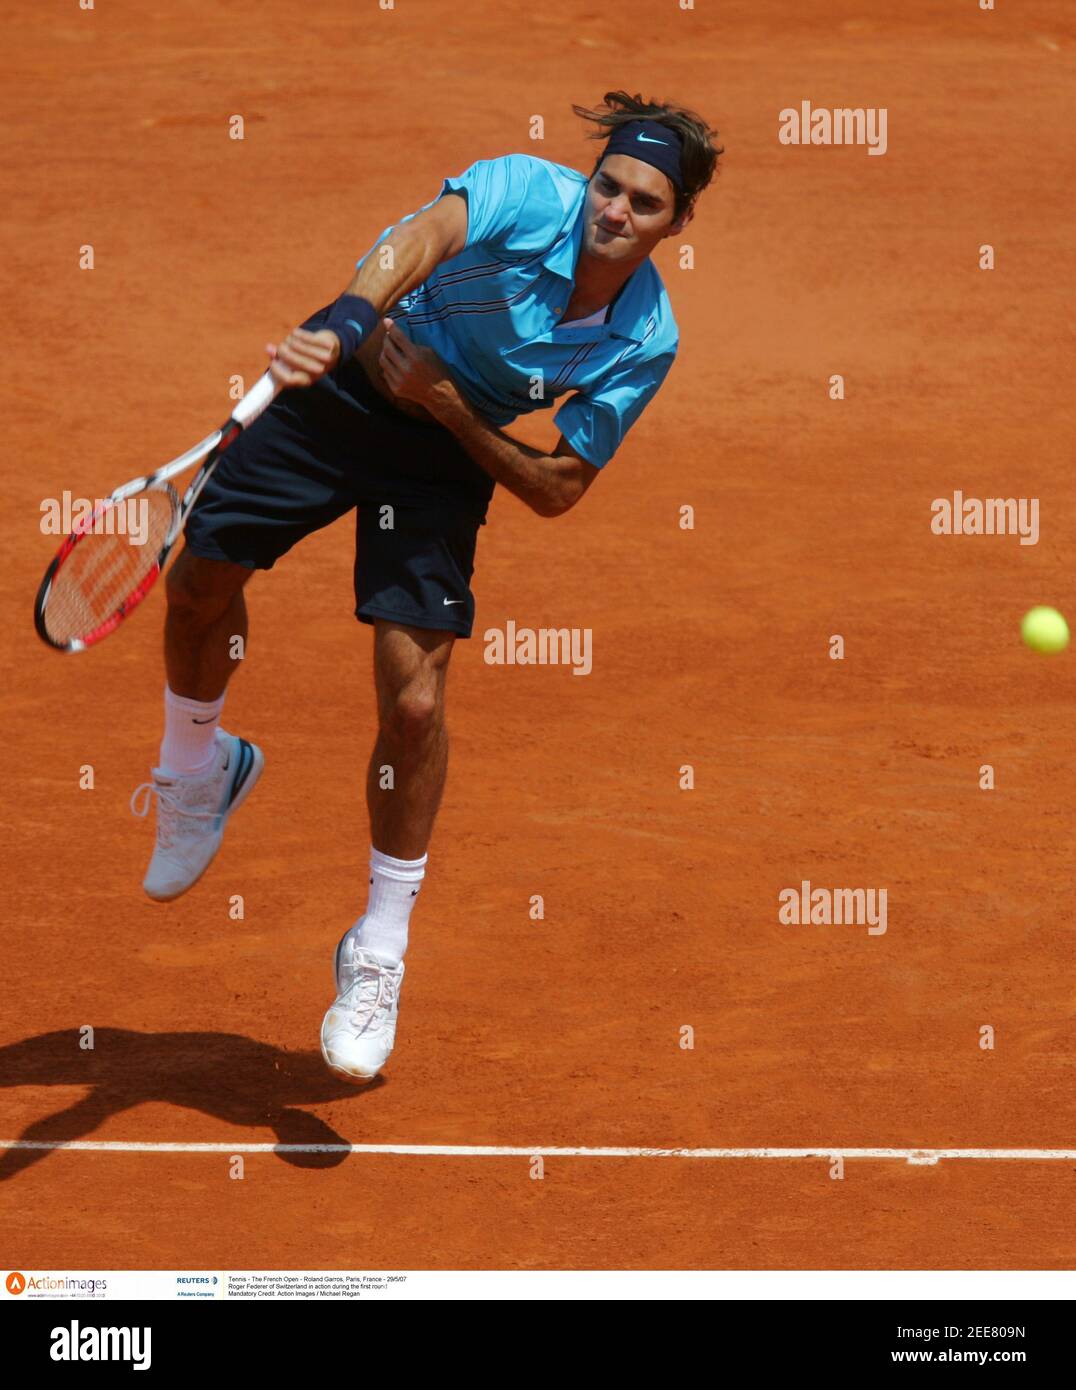 Tennis - The French Open - Roland Garros, Paris, France - 29/5/07 Roger  Federer of Switzerland in action during the first round Mandatory Credit:  Action Images / Michael Regan Stock Photo - Alamy